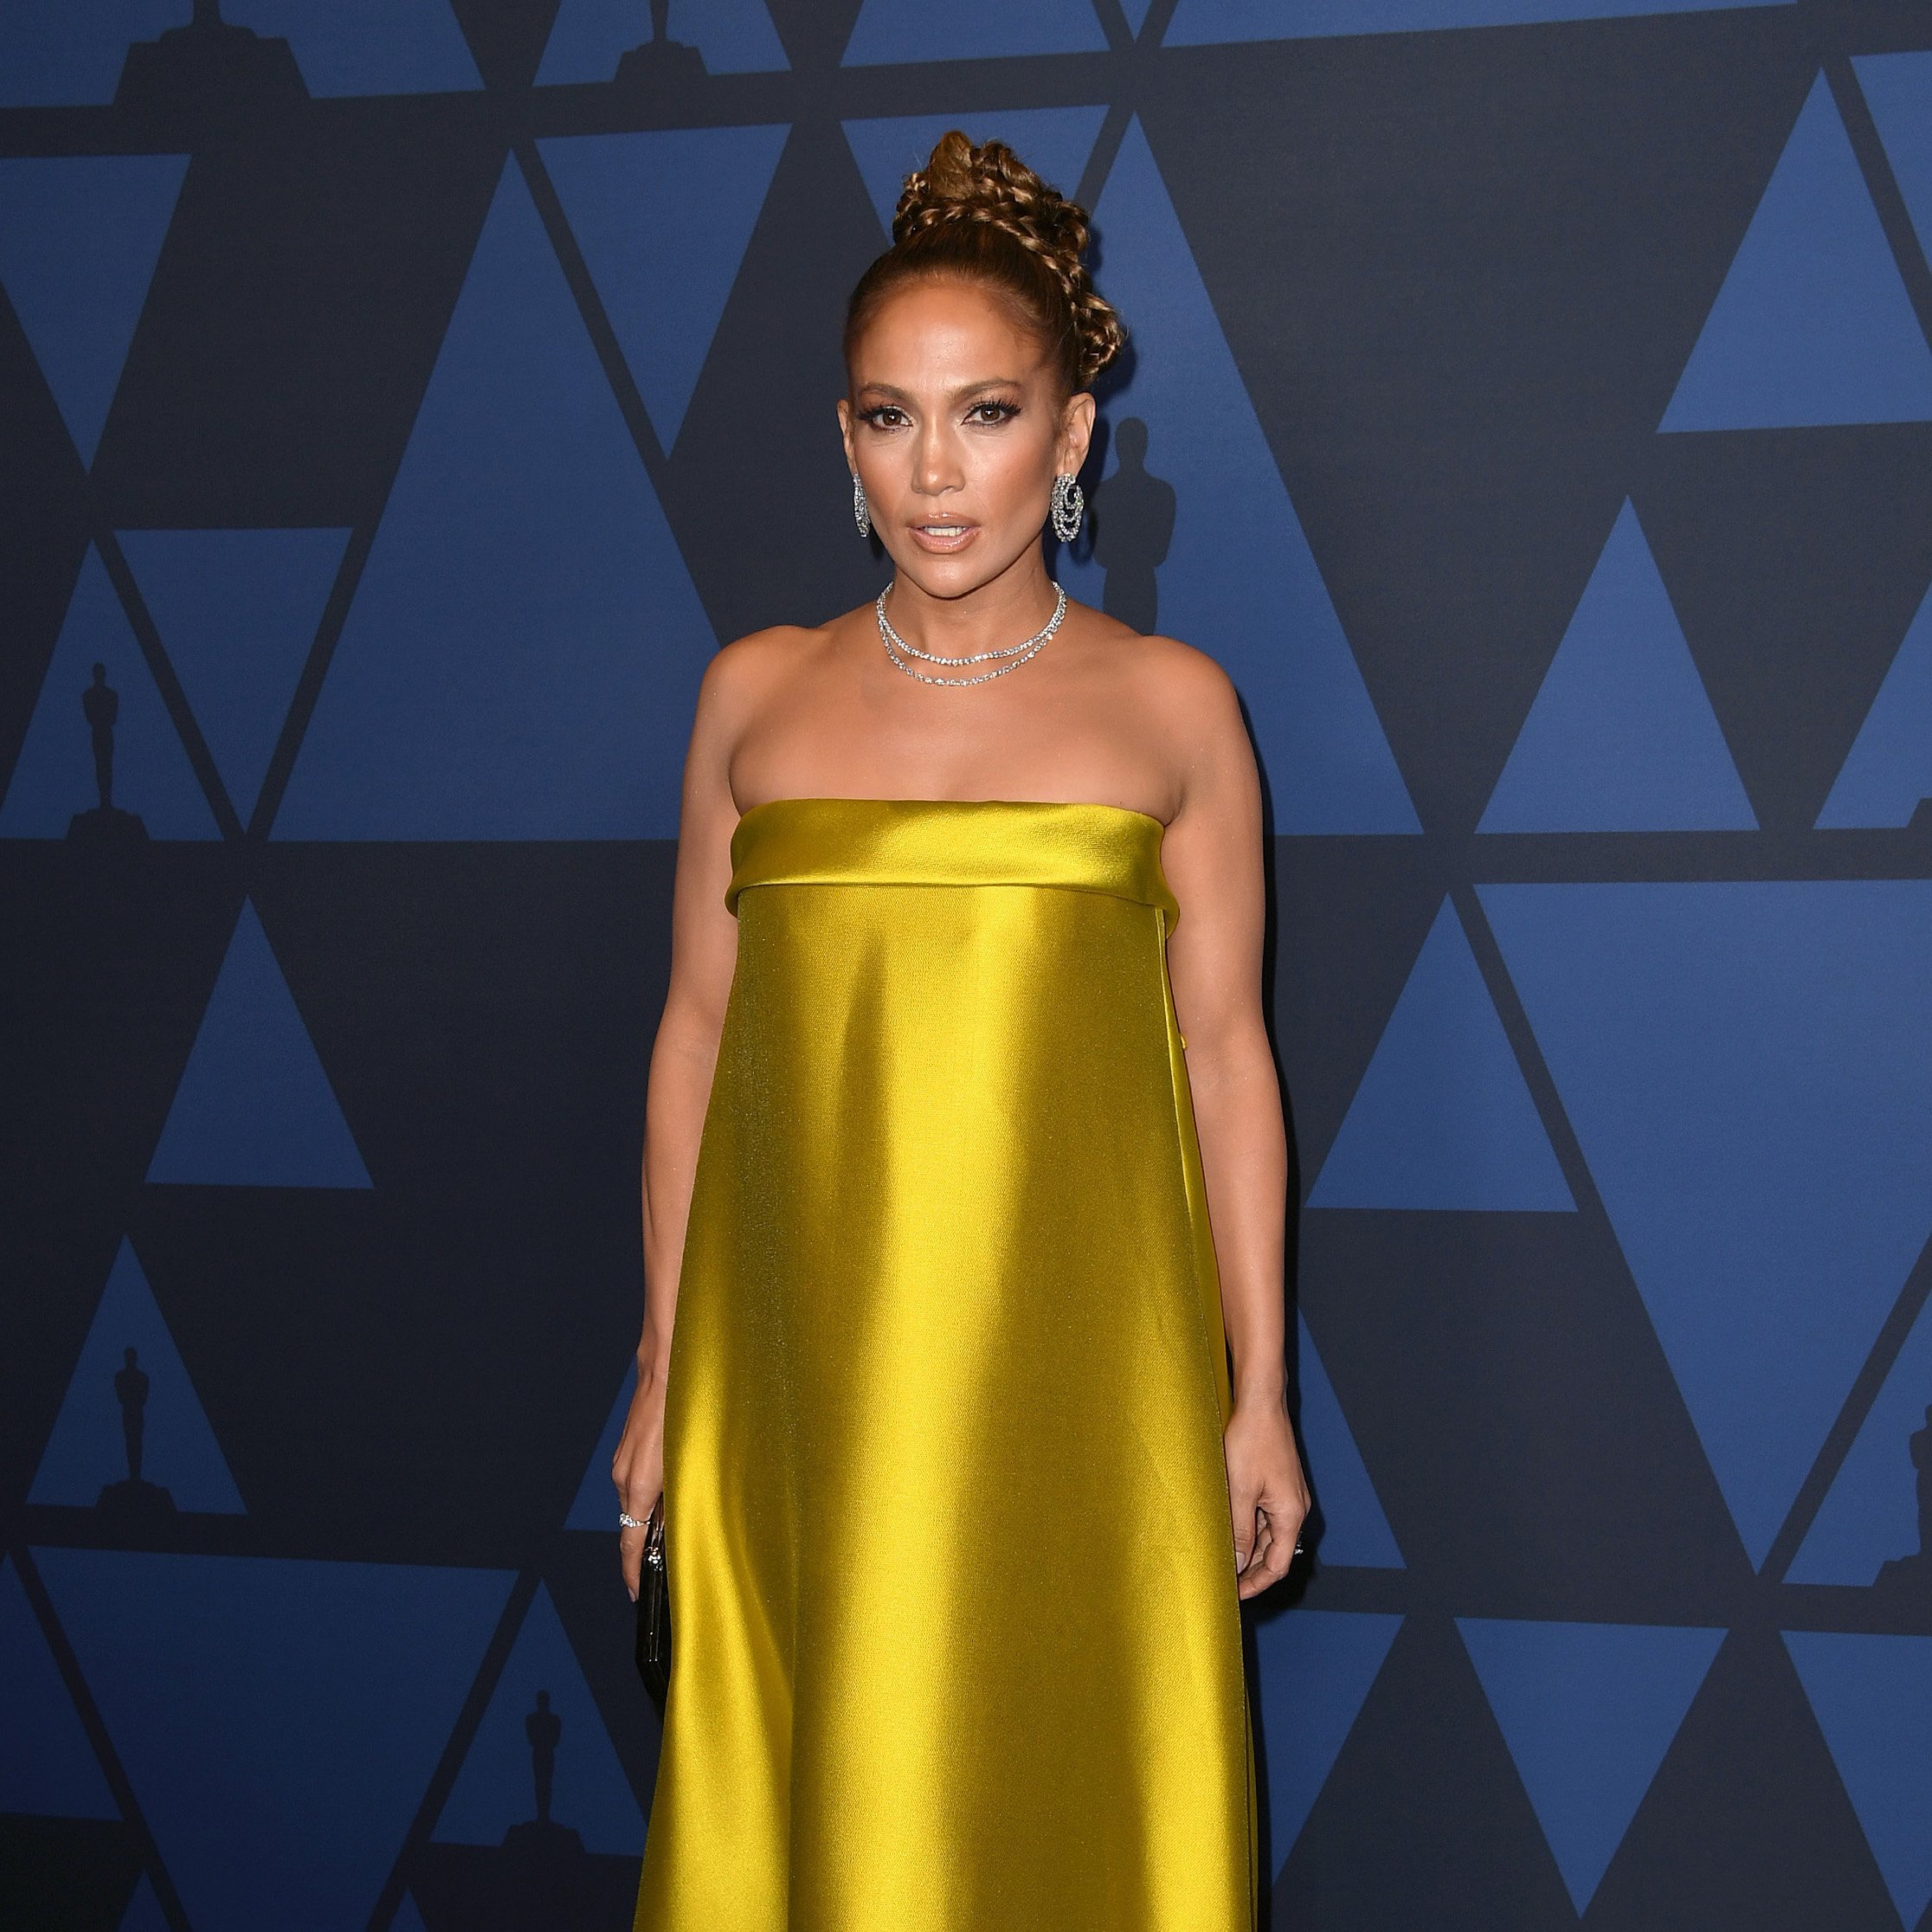 Jennifer Lopez attends the Annual Governors Awards in Hollywood, California on October 27, 2019 | Photo: Getty Images